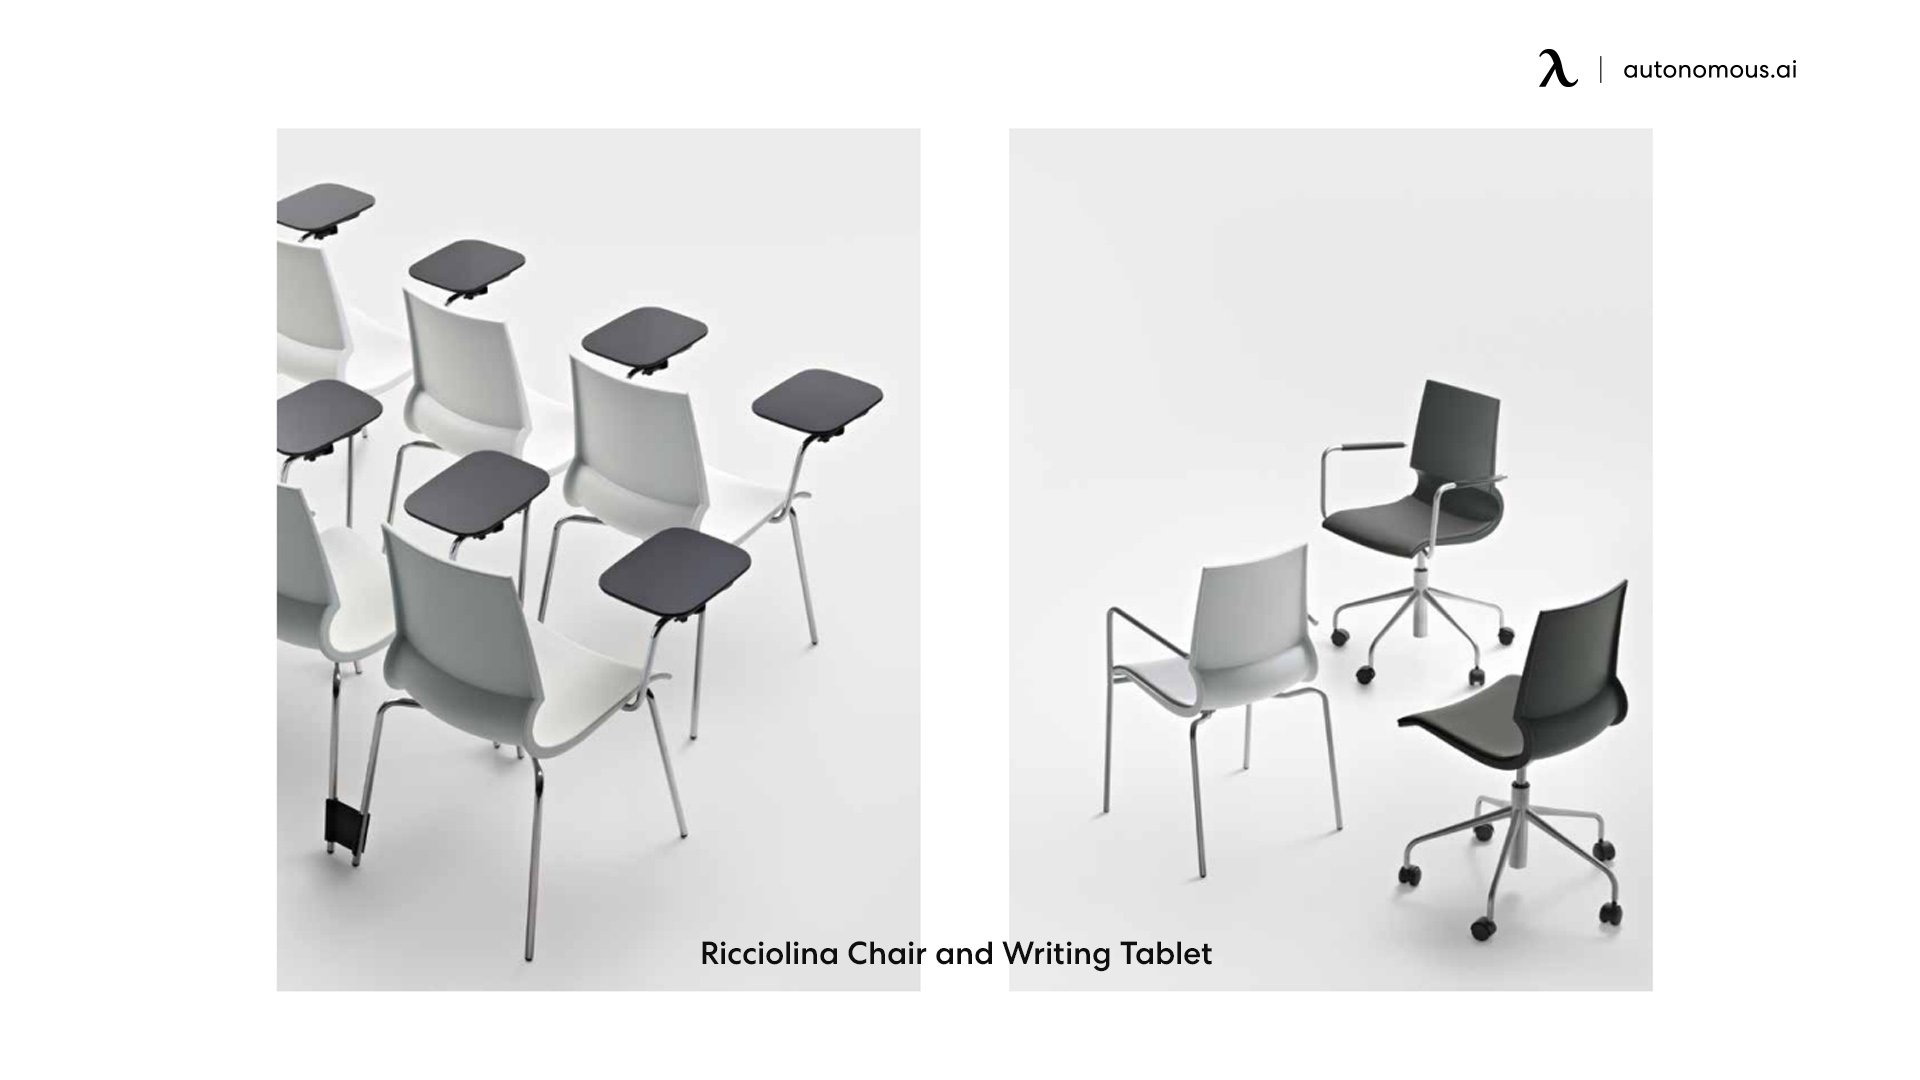 Ricciolina Chair and Writing Tablet